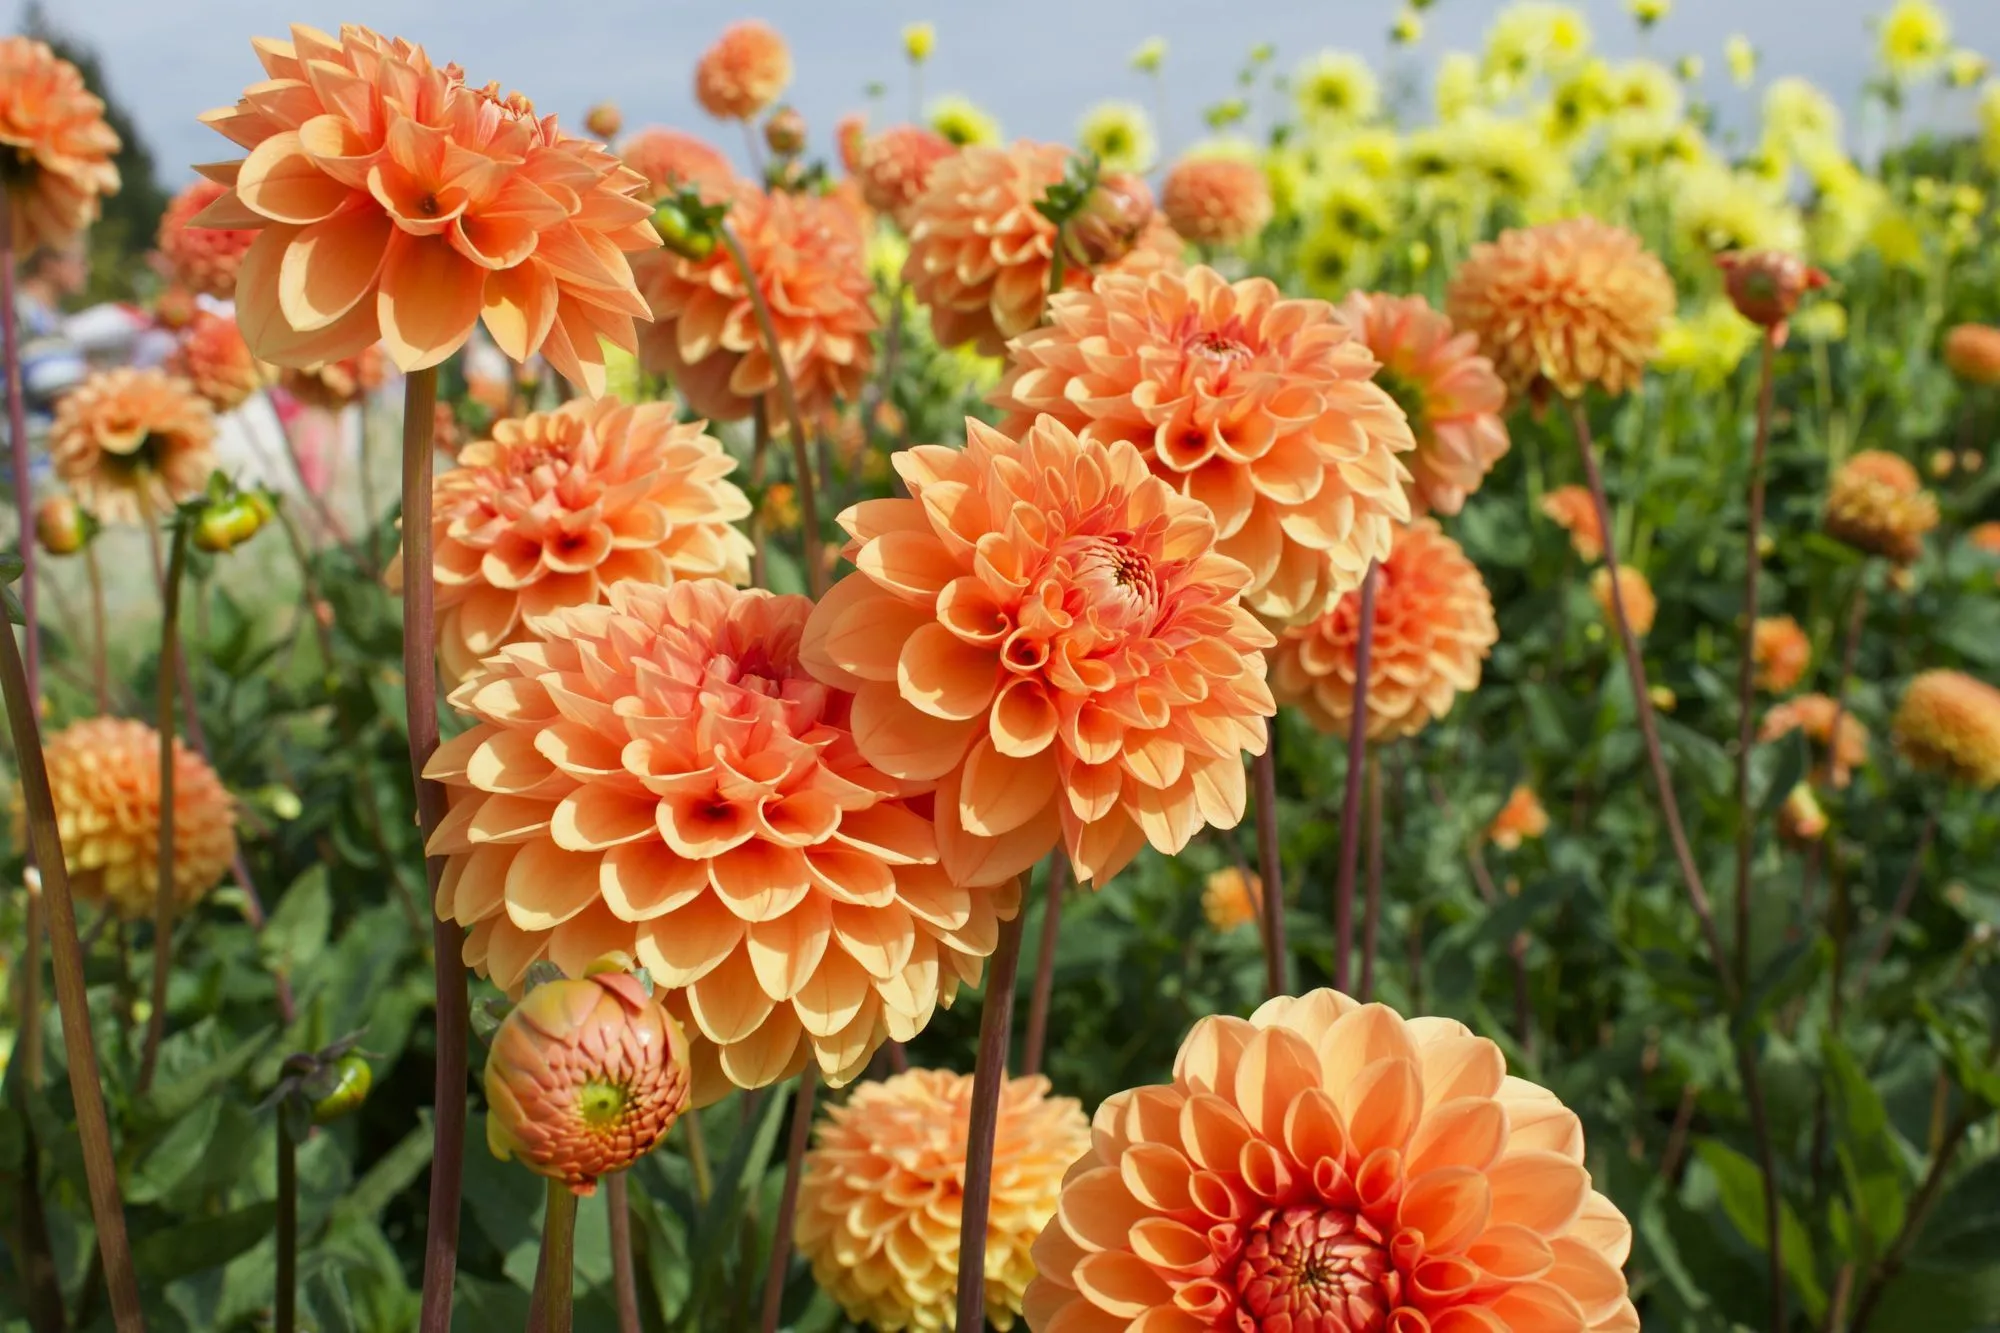 Flowers That Start With D: The Beautiful Flower Plants List Revealed!